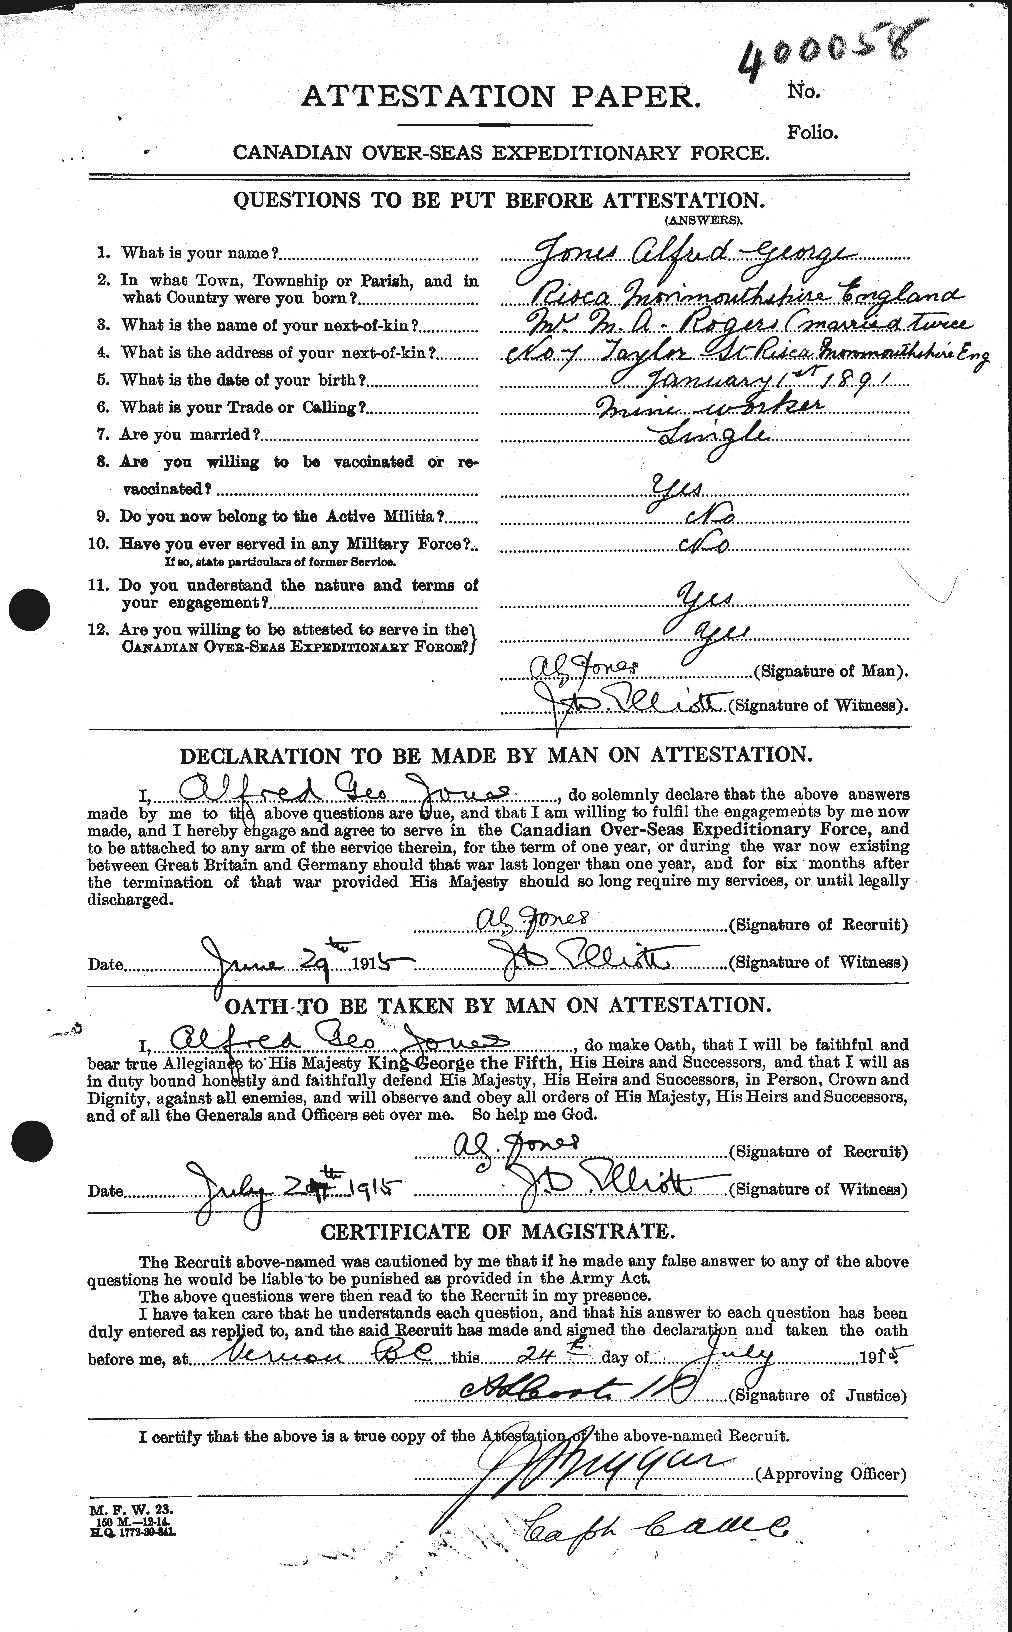 Personnel Records of the First World War - CEF 422532a